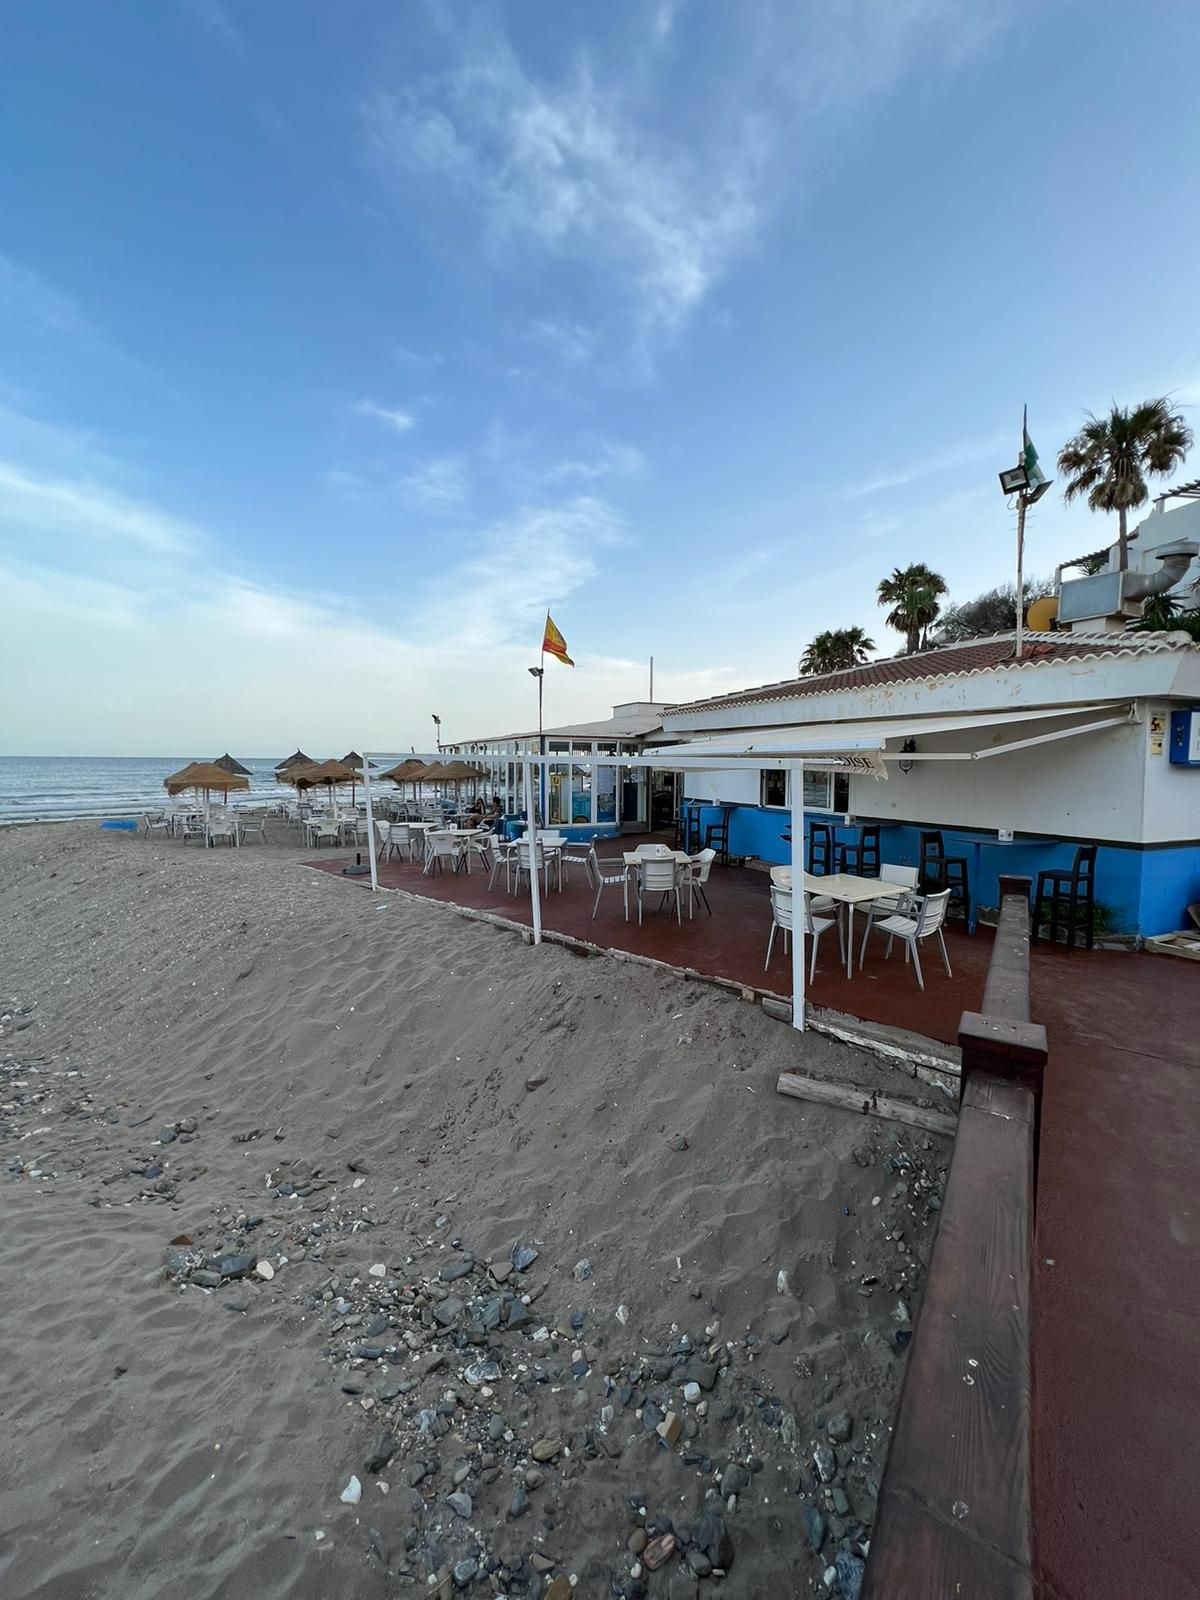 						Commercial  Other
													for sale 
																			 in Mijas
					